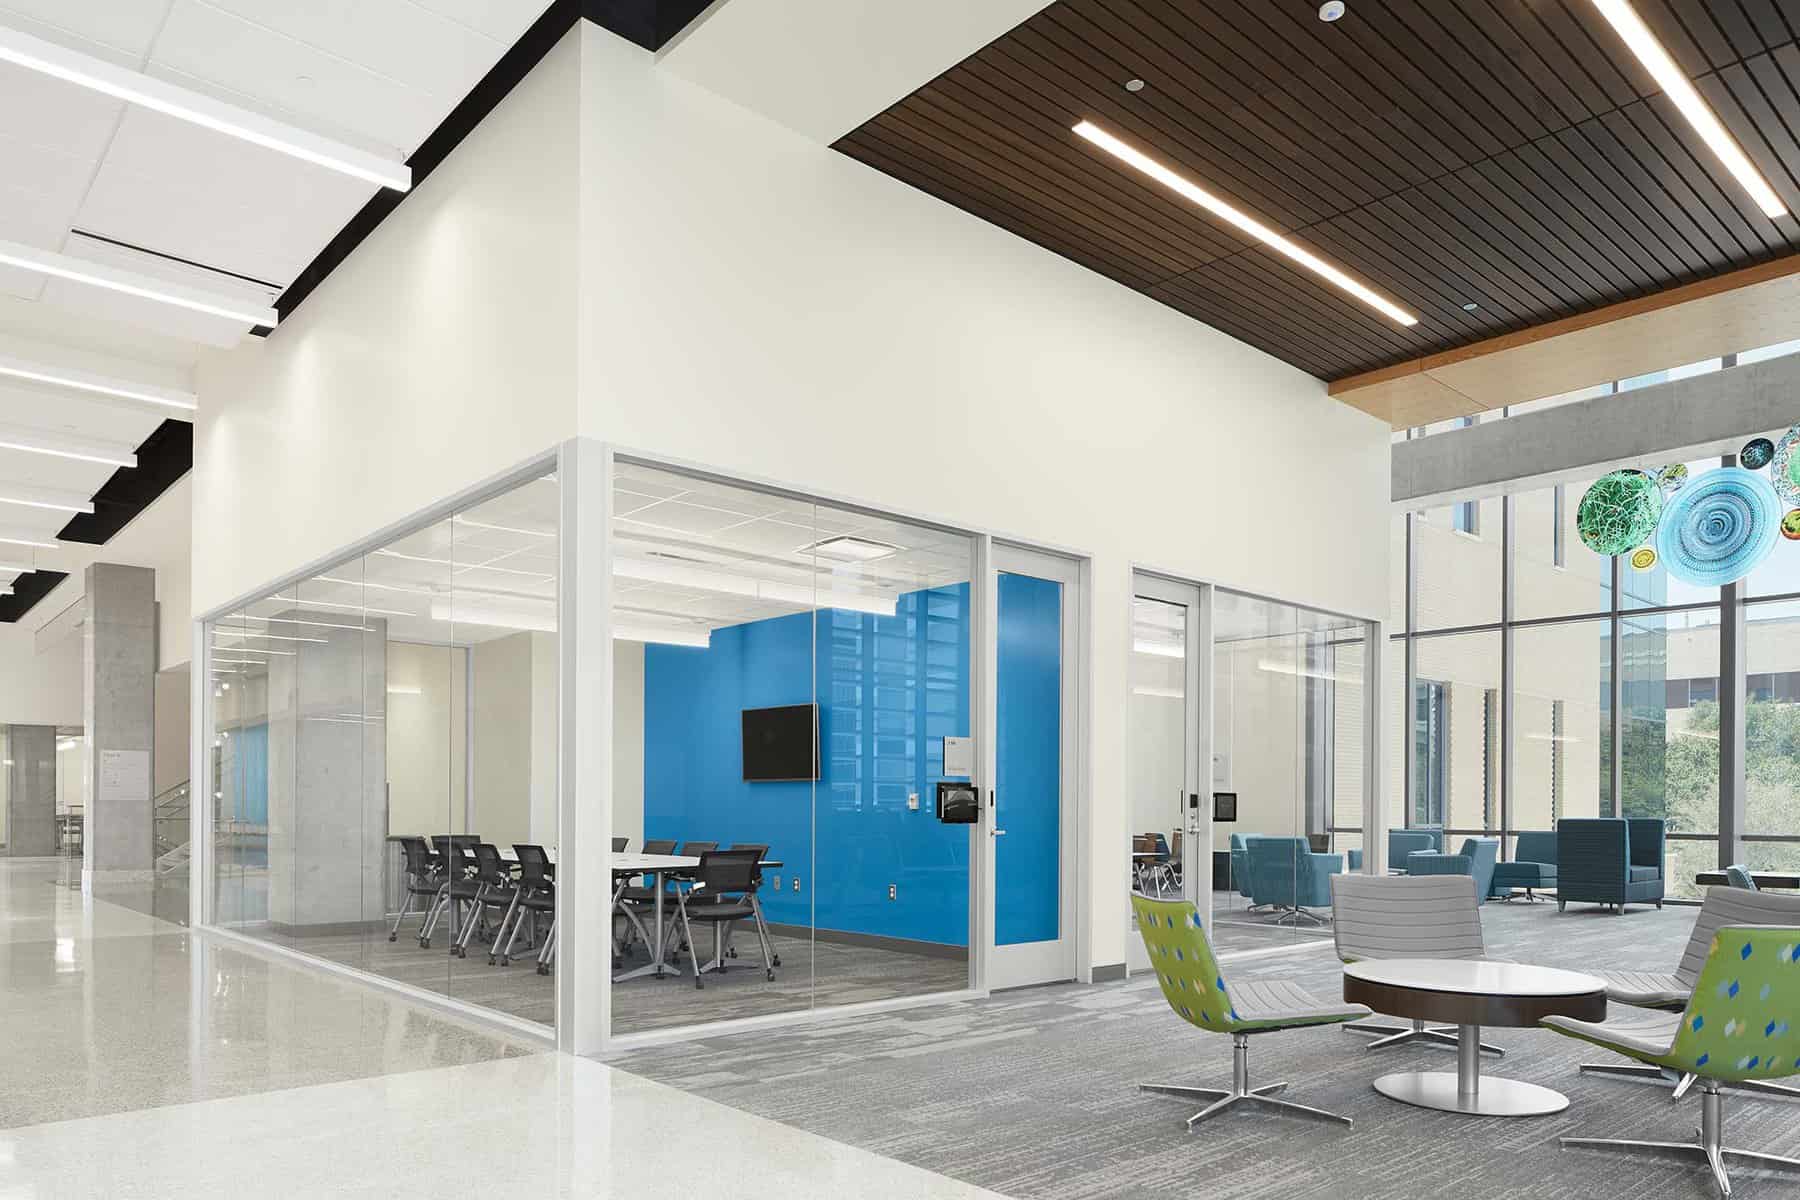 Meeting room with glass walls in the lobby of a learning center.